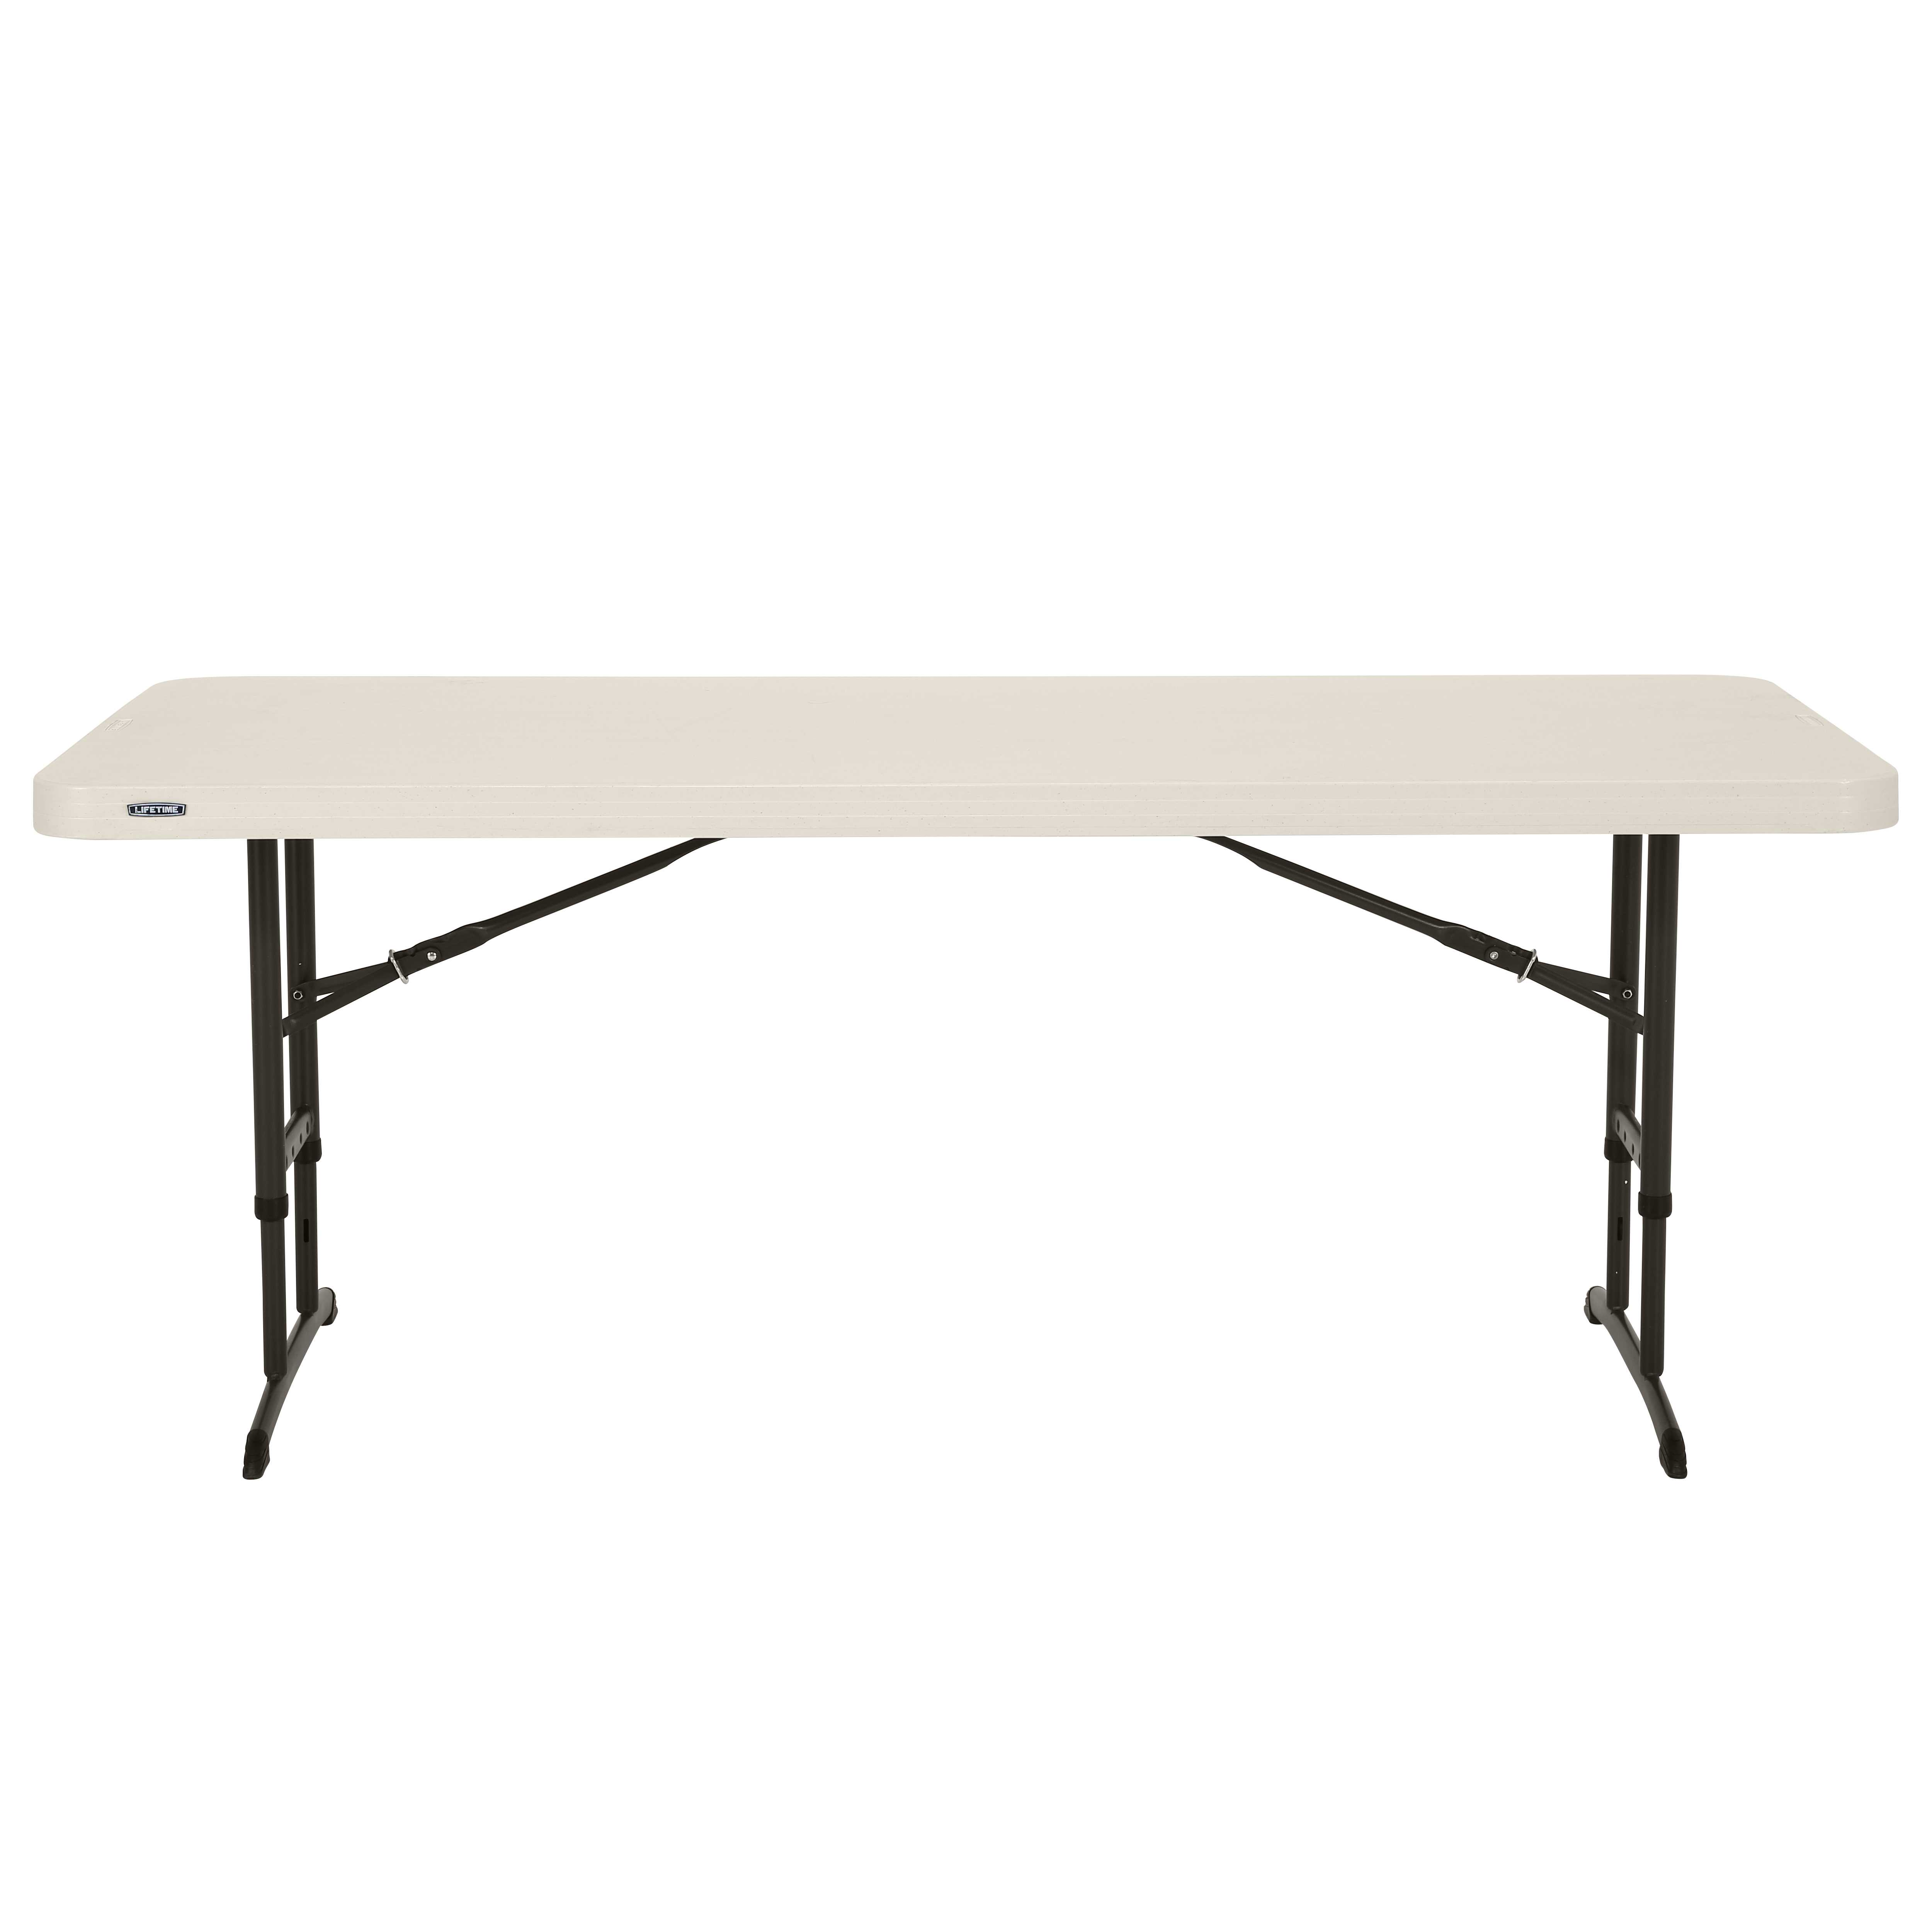 6ft Rectangular adjustable height folding table 183cm / 8 people / NESTING heavy commercial